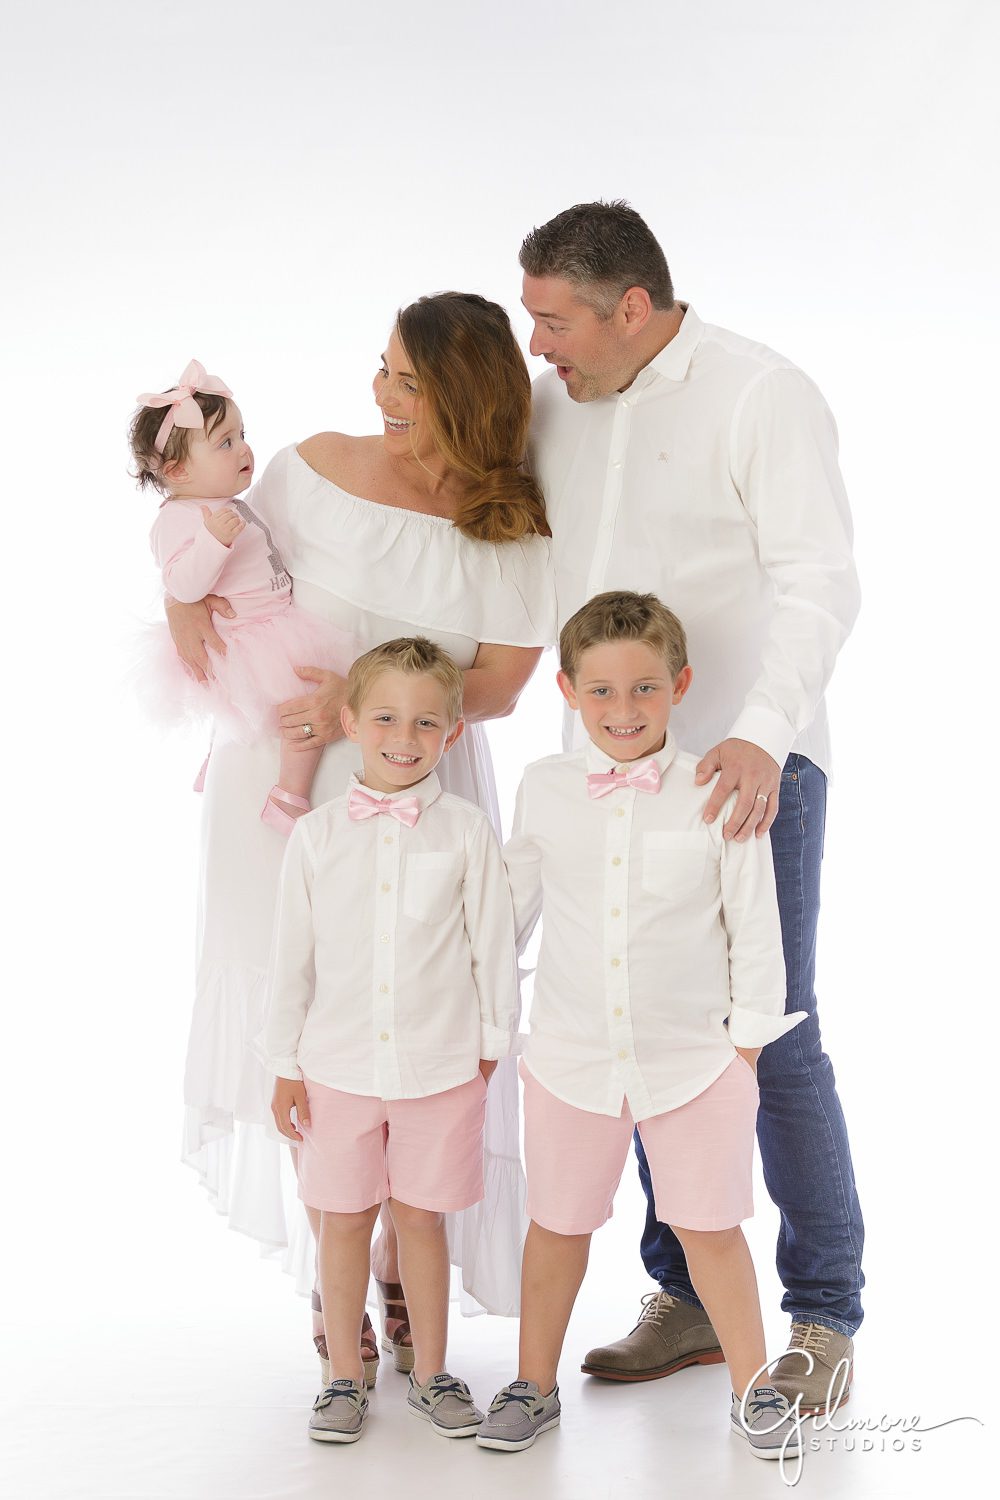 Ballerina Cake Smash Session, portrait photography, family shoot, parents, matching outfits, white, pink, bow tie, jeans, shorts, dress, siblings, sister, brothers